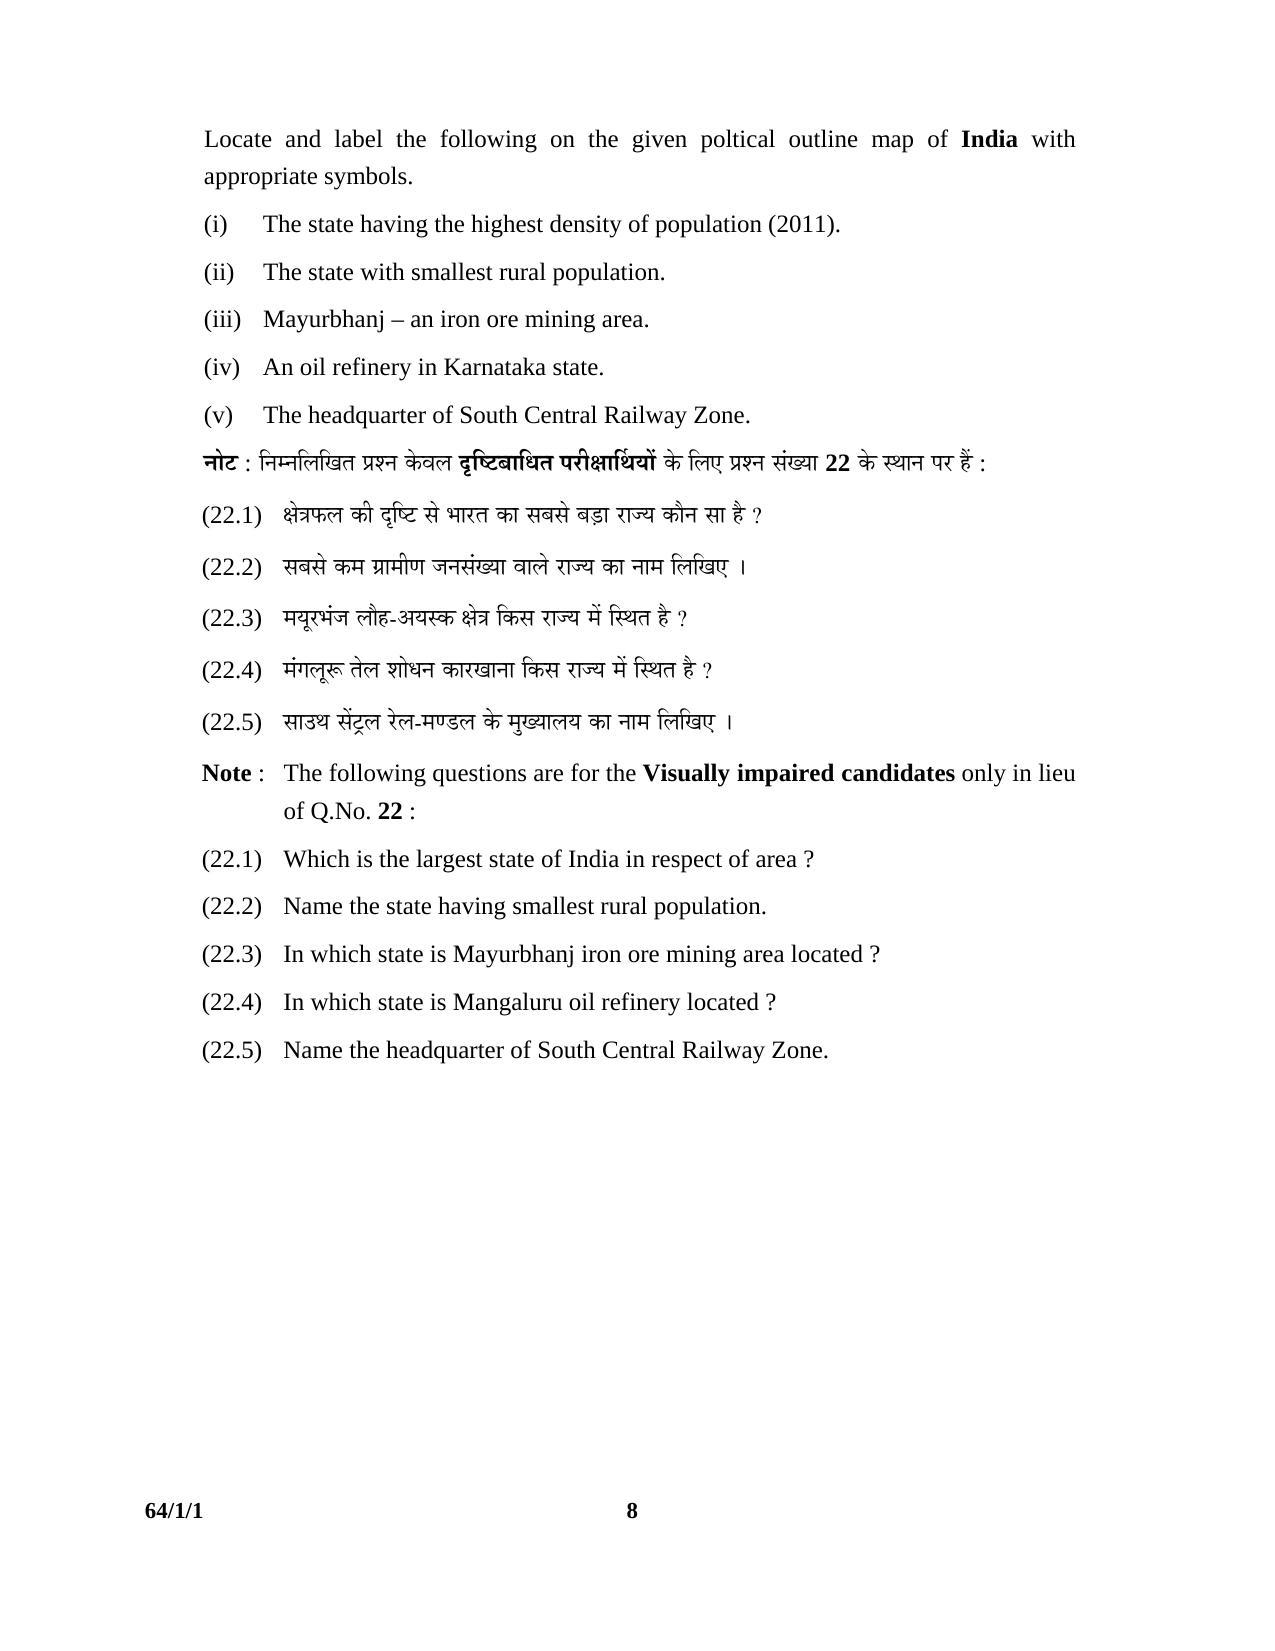 CBSE Class 12 64-1-1 GEOGRAPHY 2016 Question Paper - Page 8